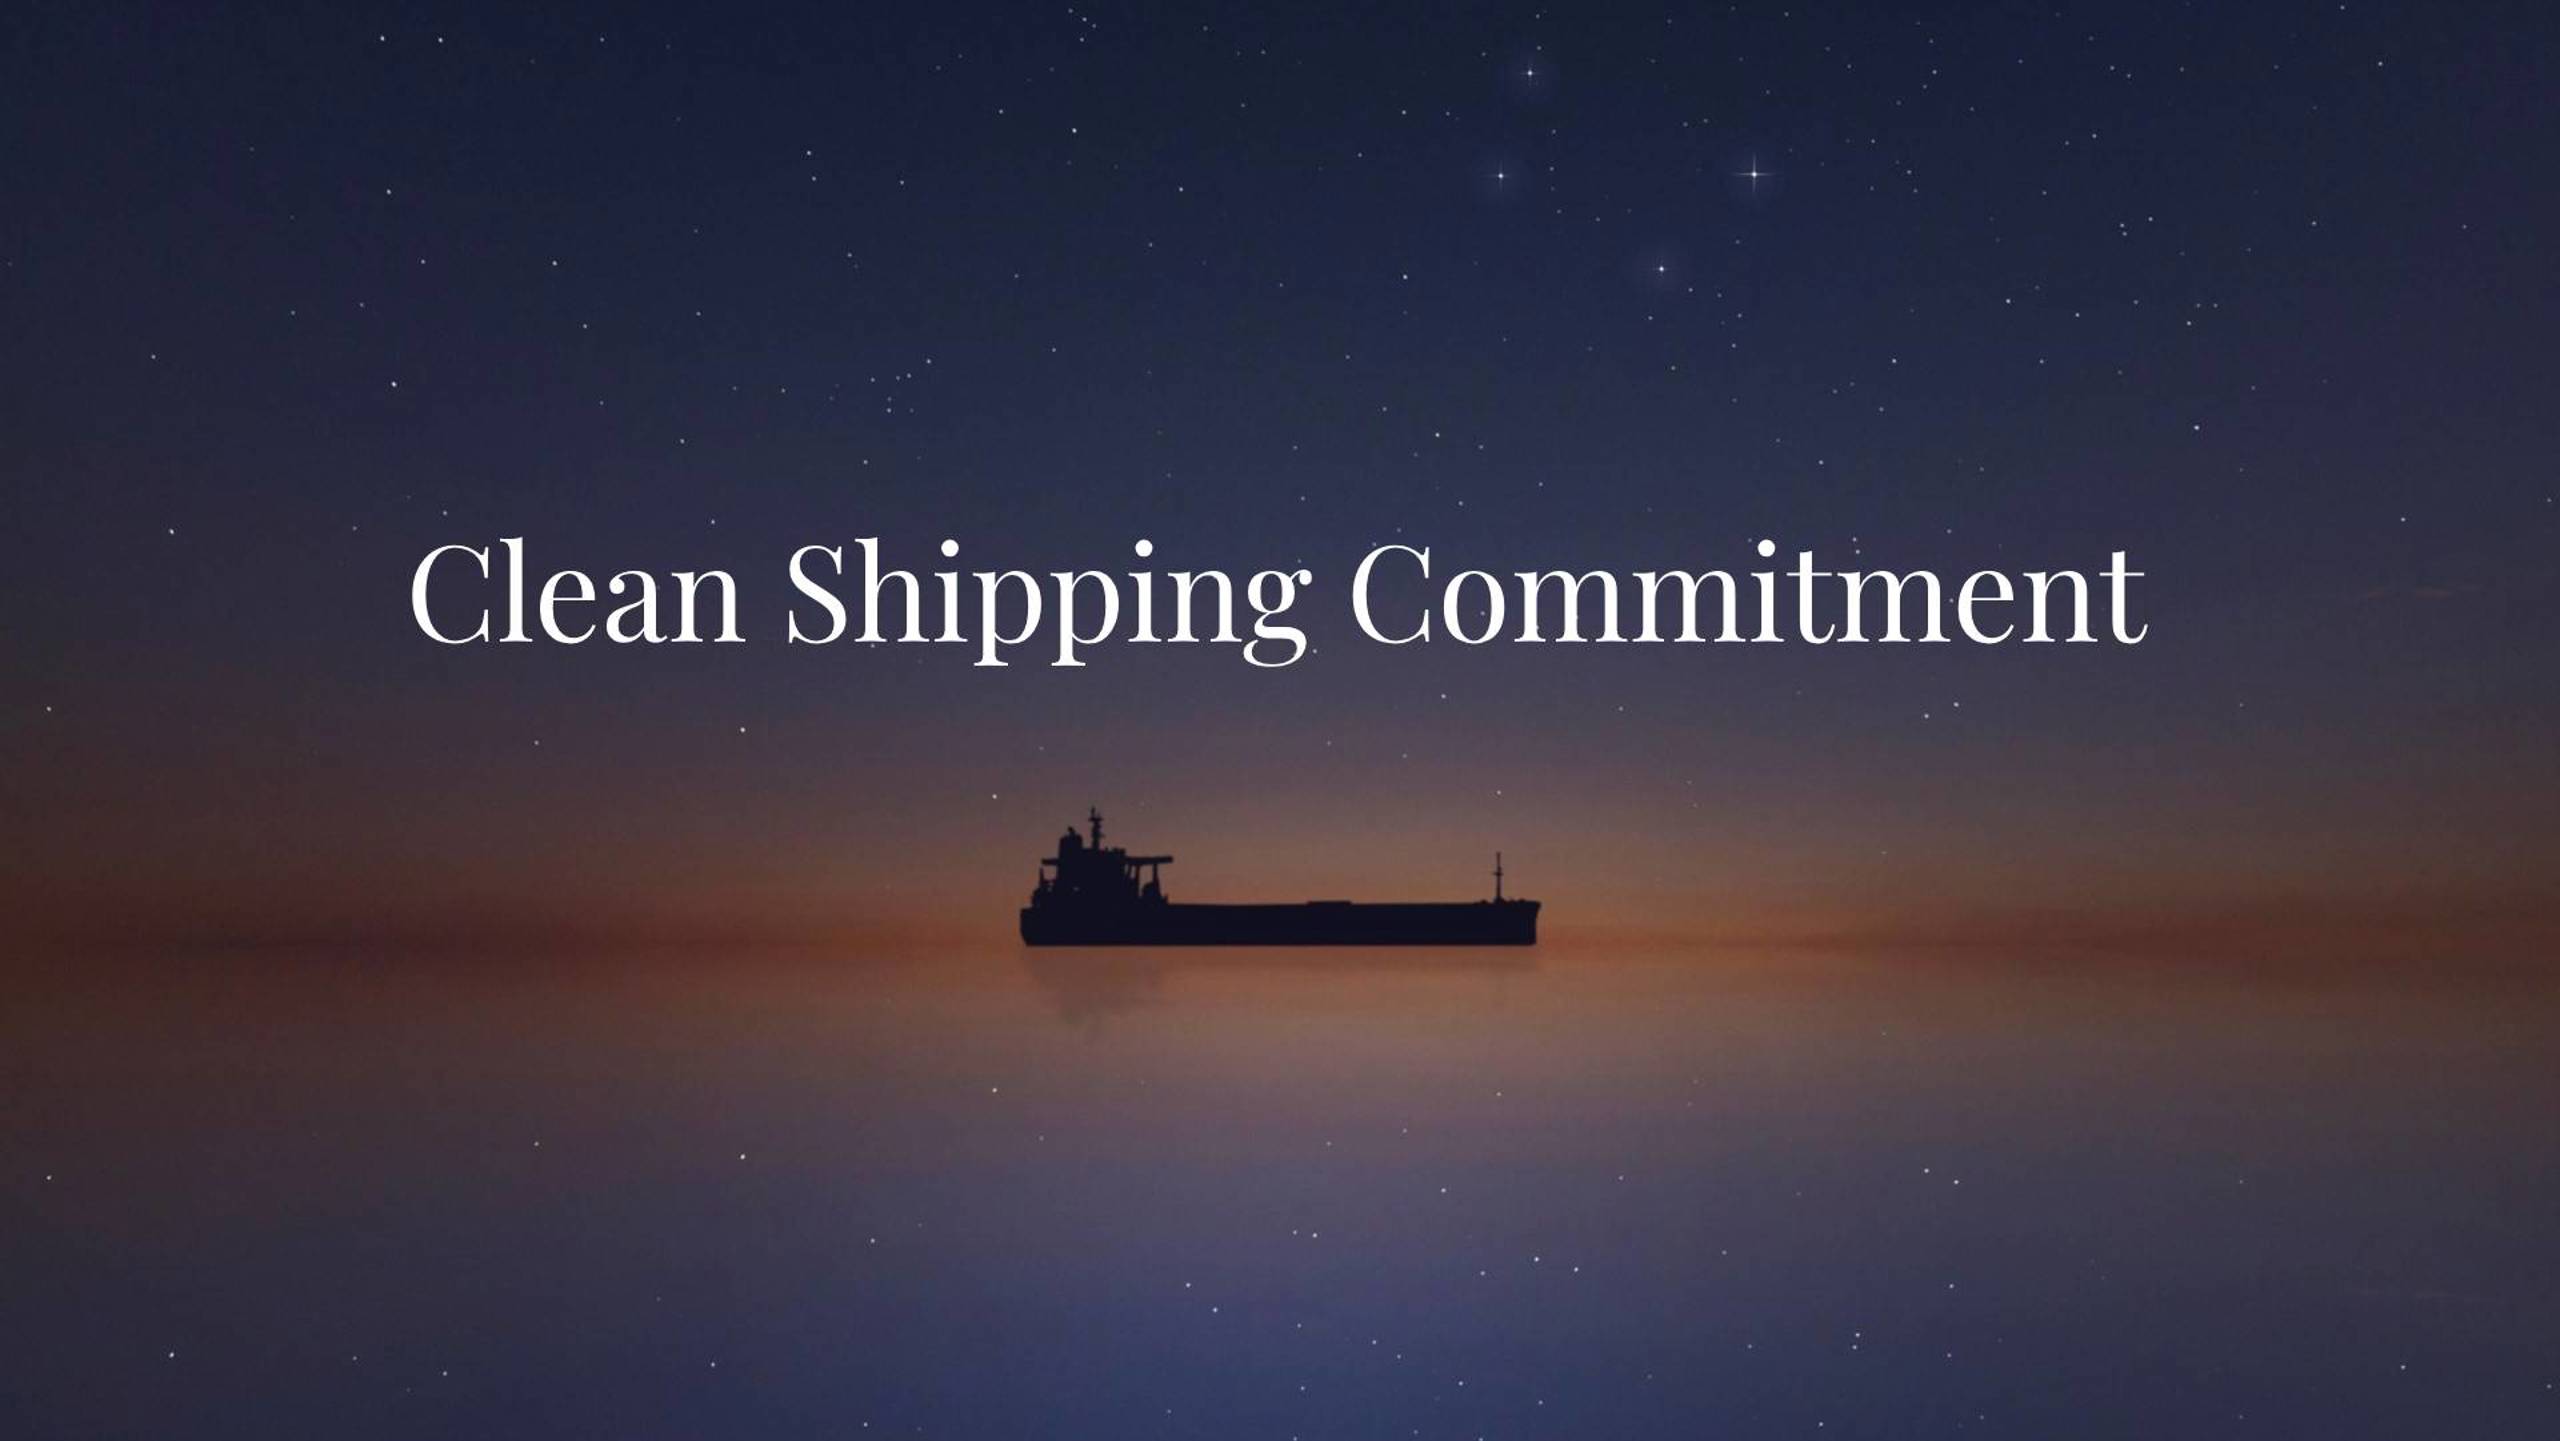 Jotun Clean Shipping Commitment